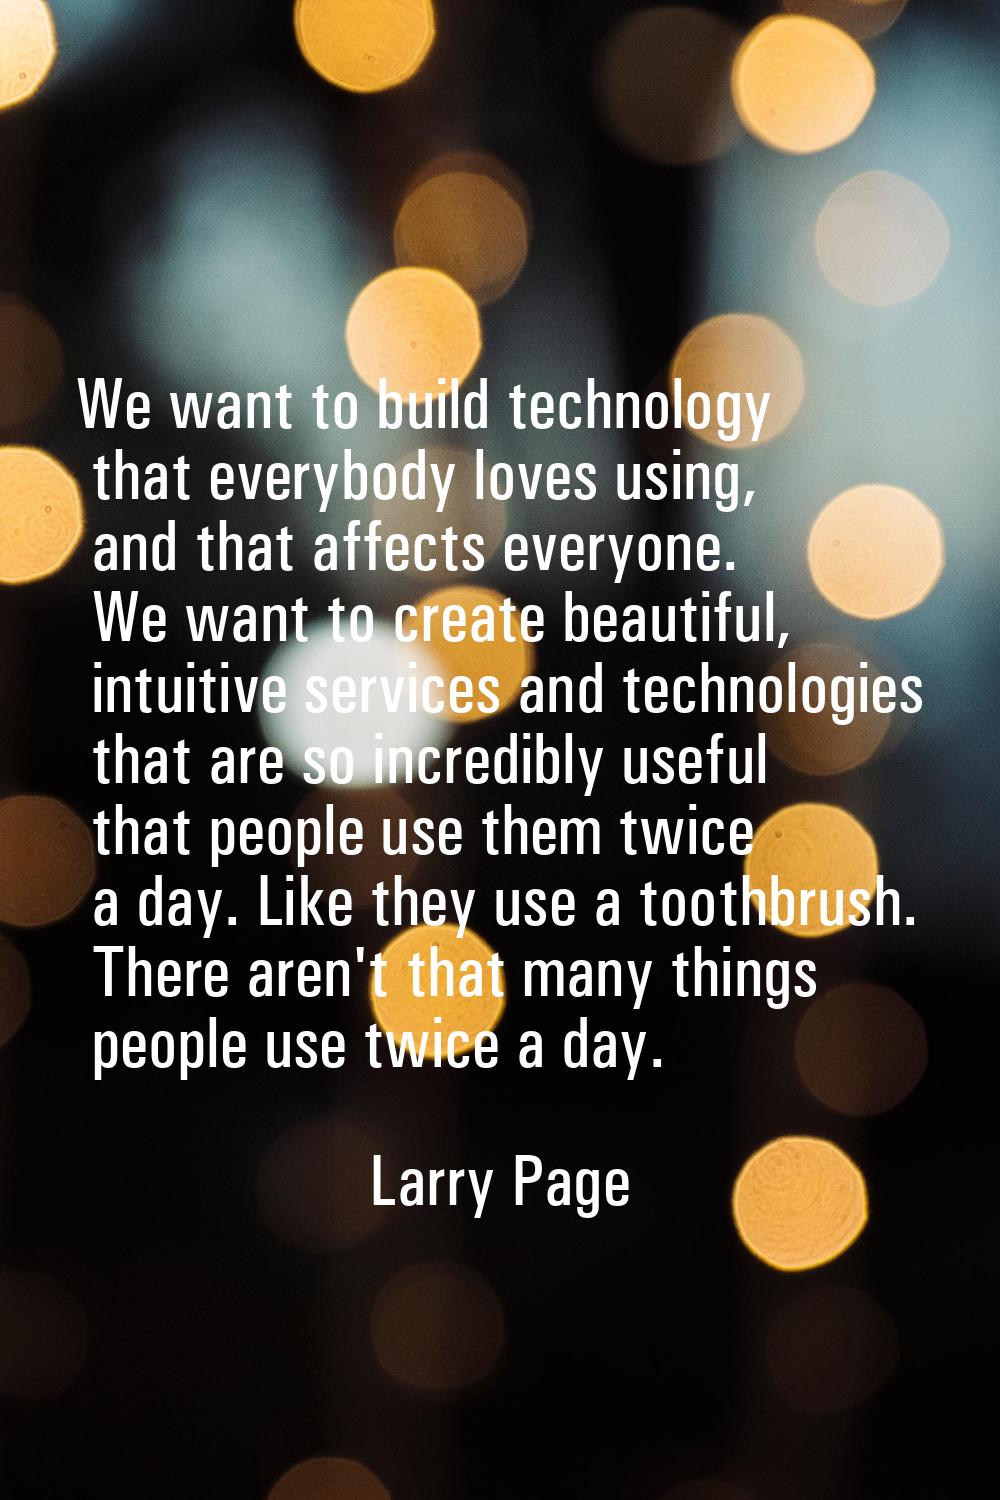 We want to build technology that everybody loves using, and that affects everyone. We want to creat